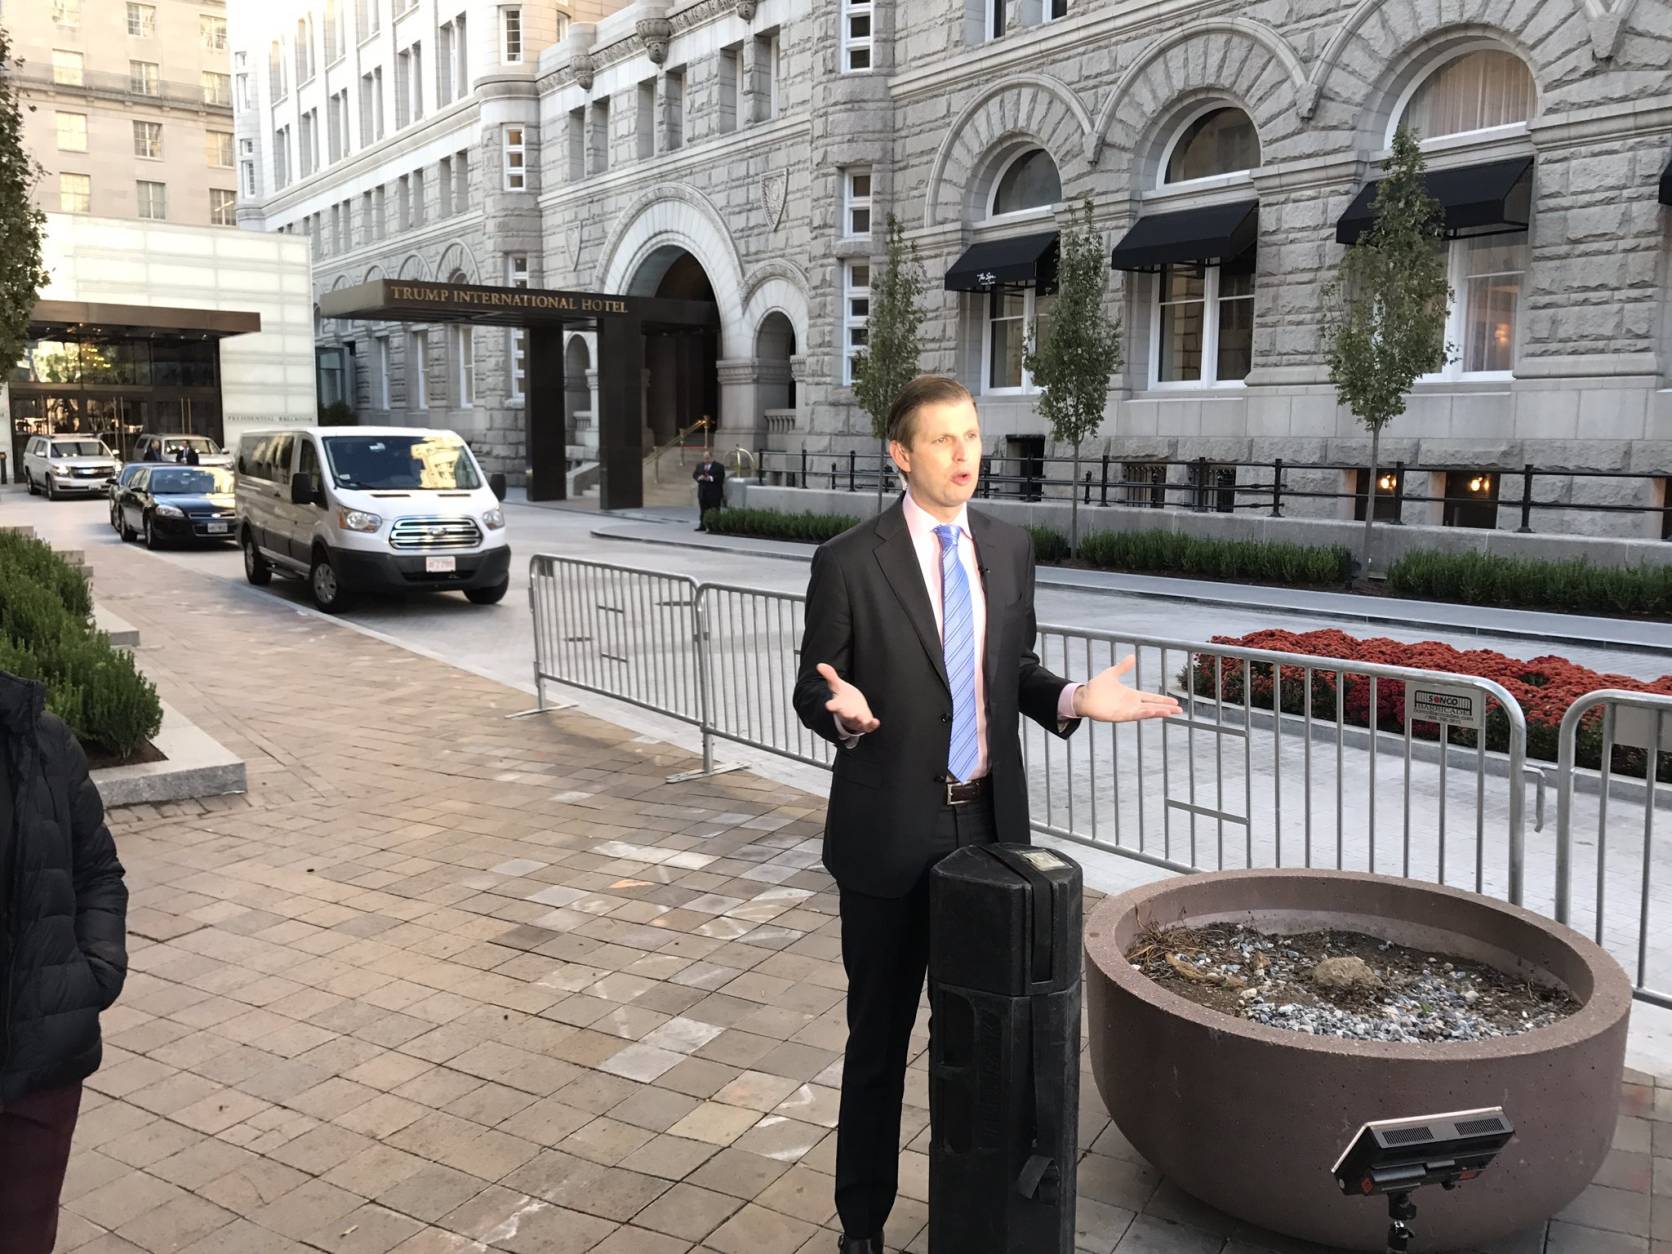 Eric Trump stumps for his father on TV at the Trump International Hotel, in D.C., on the morning of the grand opening, Oct. 26, 2016. (WTOP/Neal Augenstein)